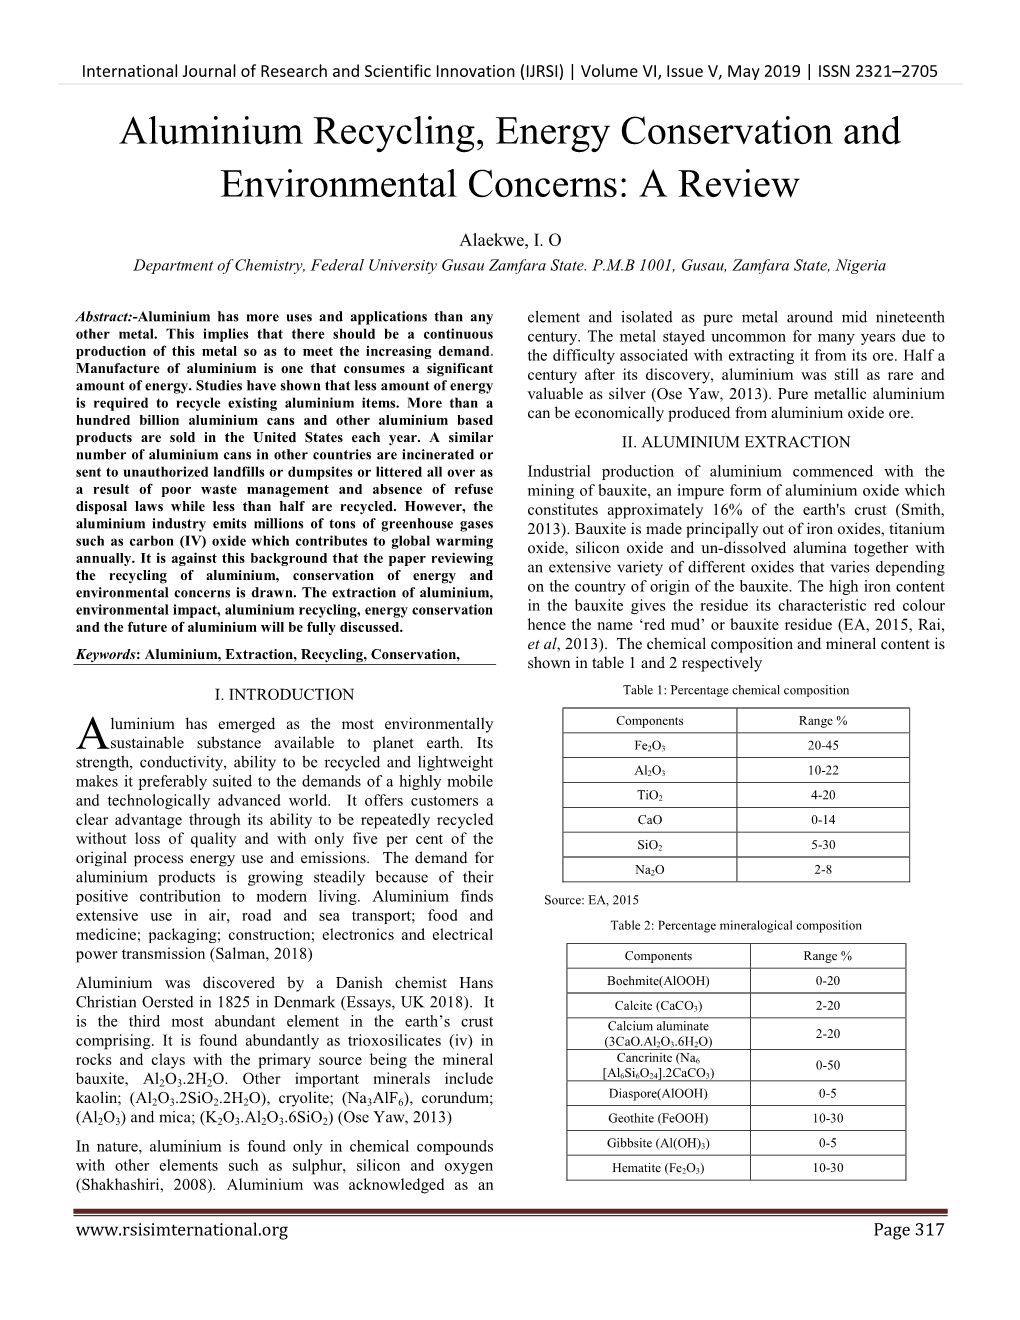 Aluminium Recycling, Energy Conservation and Environmental Concerns: a Review